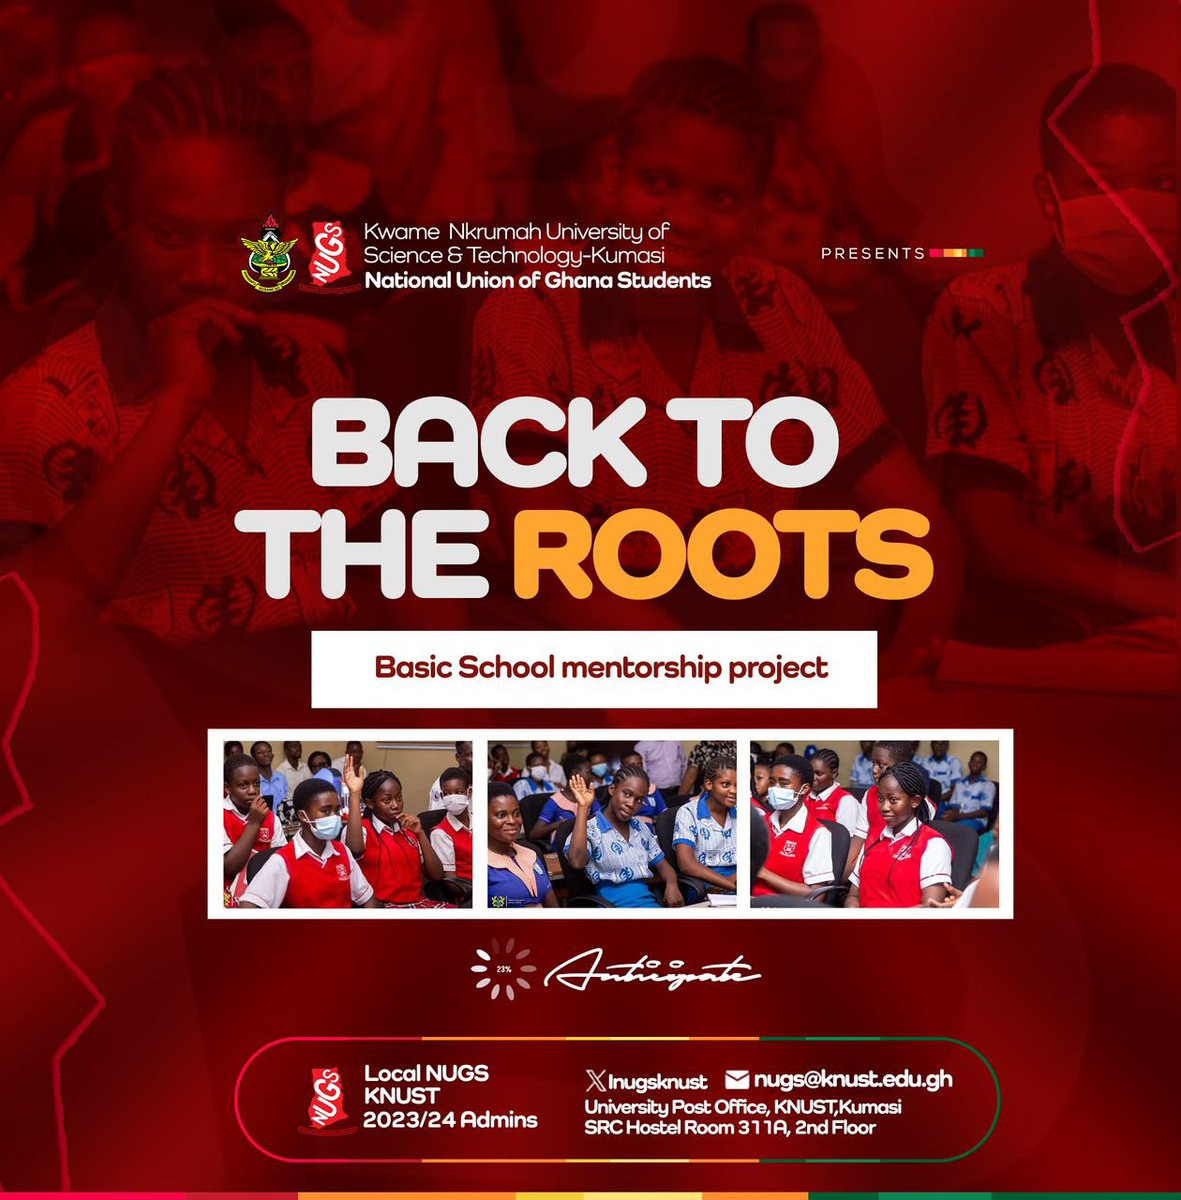 The KNUST LNUGS Basic School Mentorship Project dubbed “Back To The Roots” soon!

Anticipate!

#BackToTheRoots